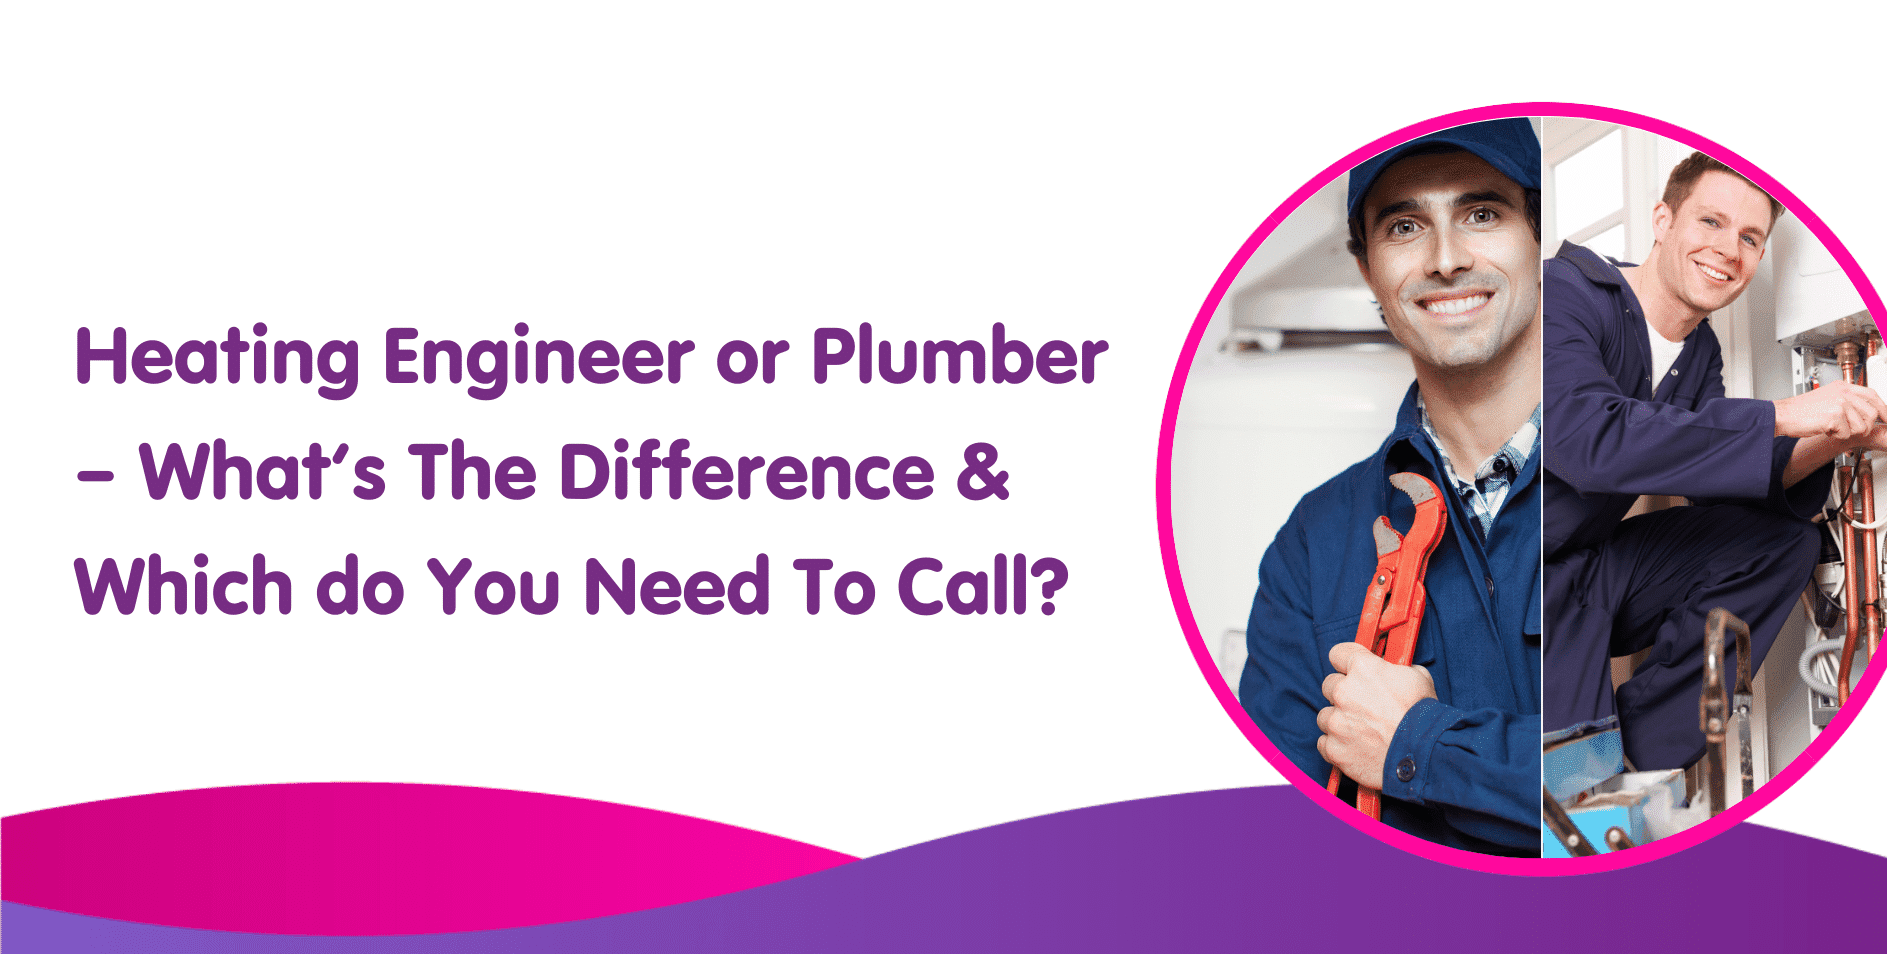 Heating Engineer or Plumber – What’s The Difference & Which do You Need To Call